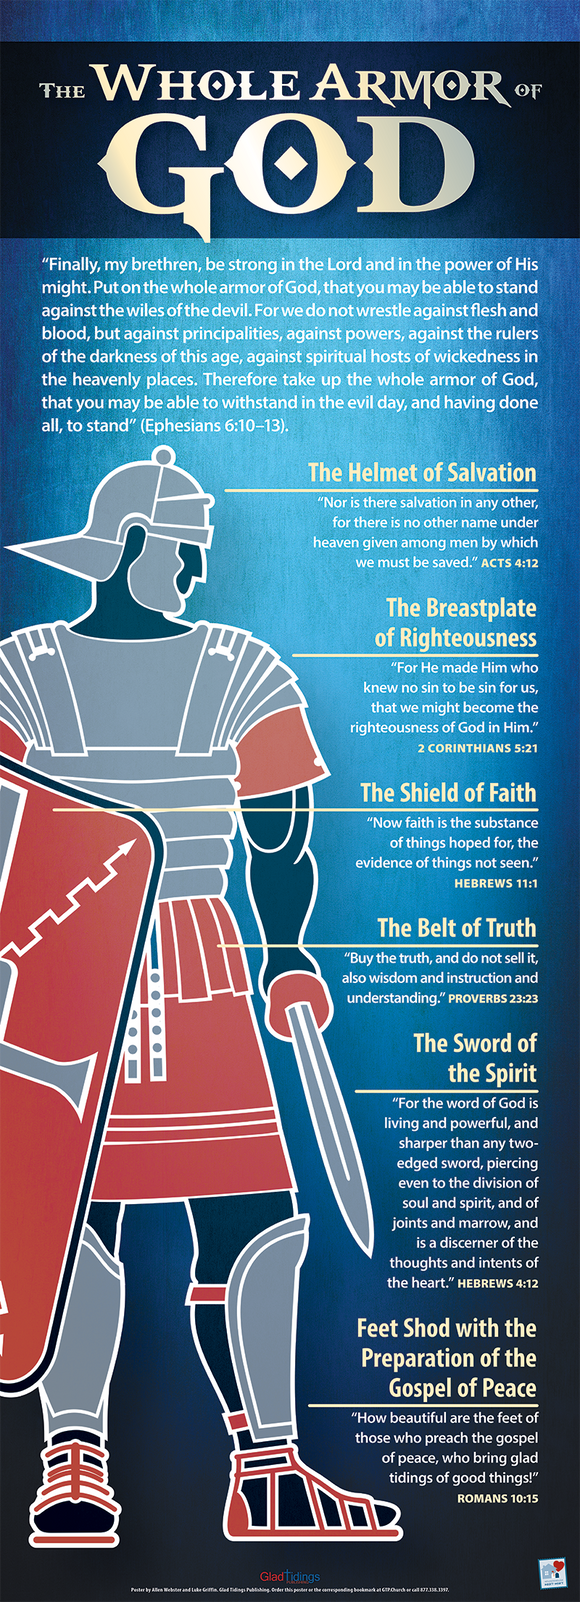 The Whole Armor of God - Oversized 21 x 58 Door Poster - Glad Tidings Publishing